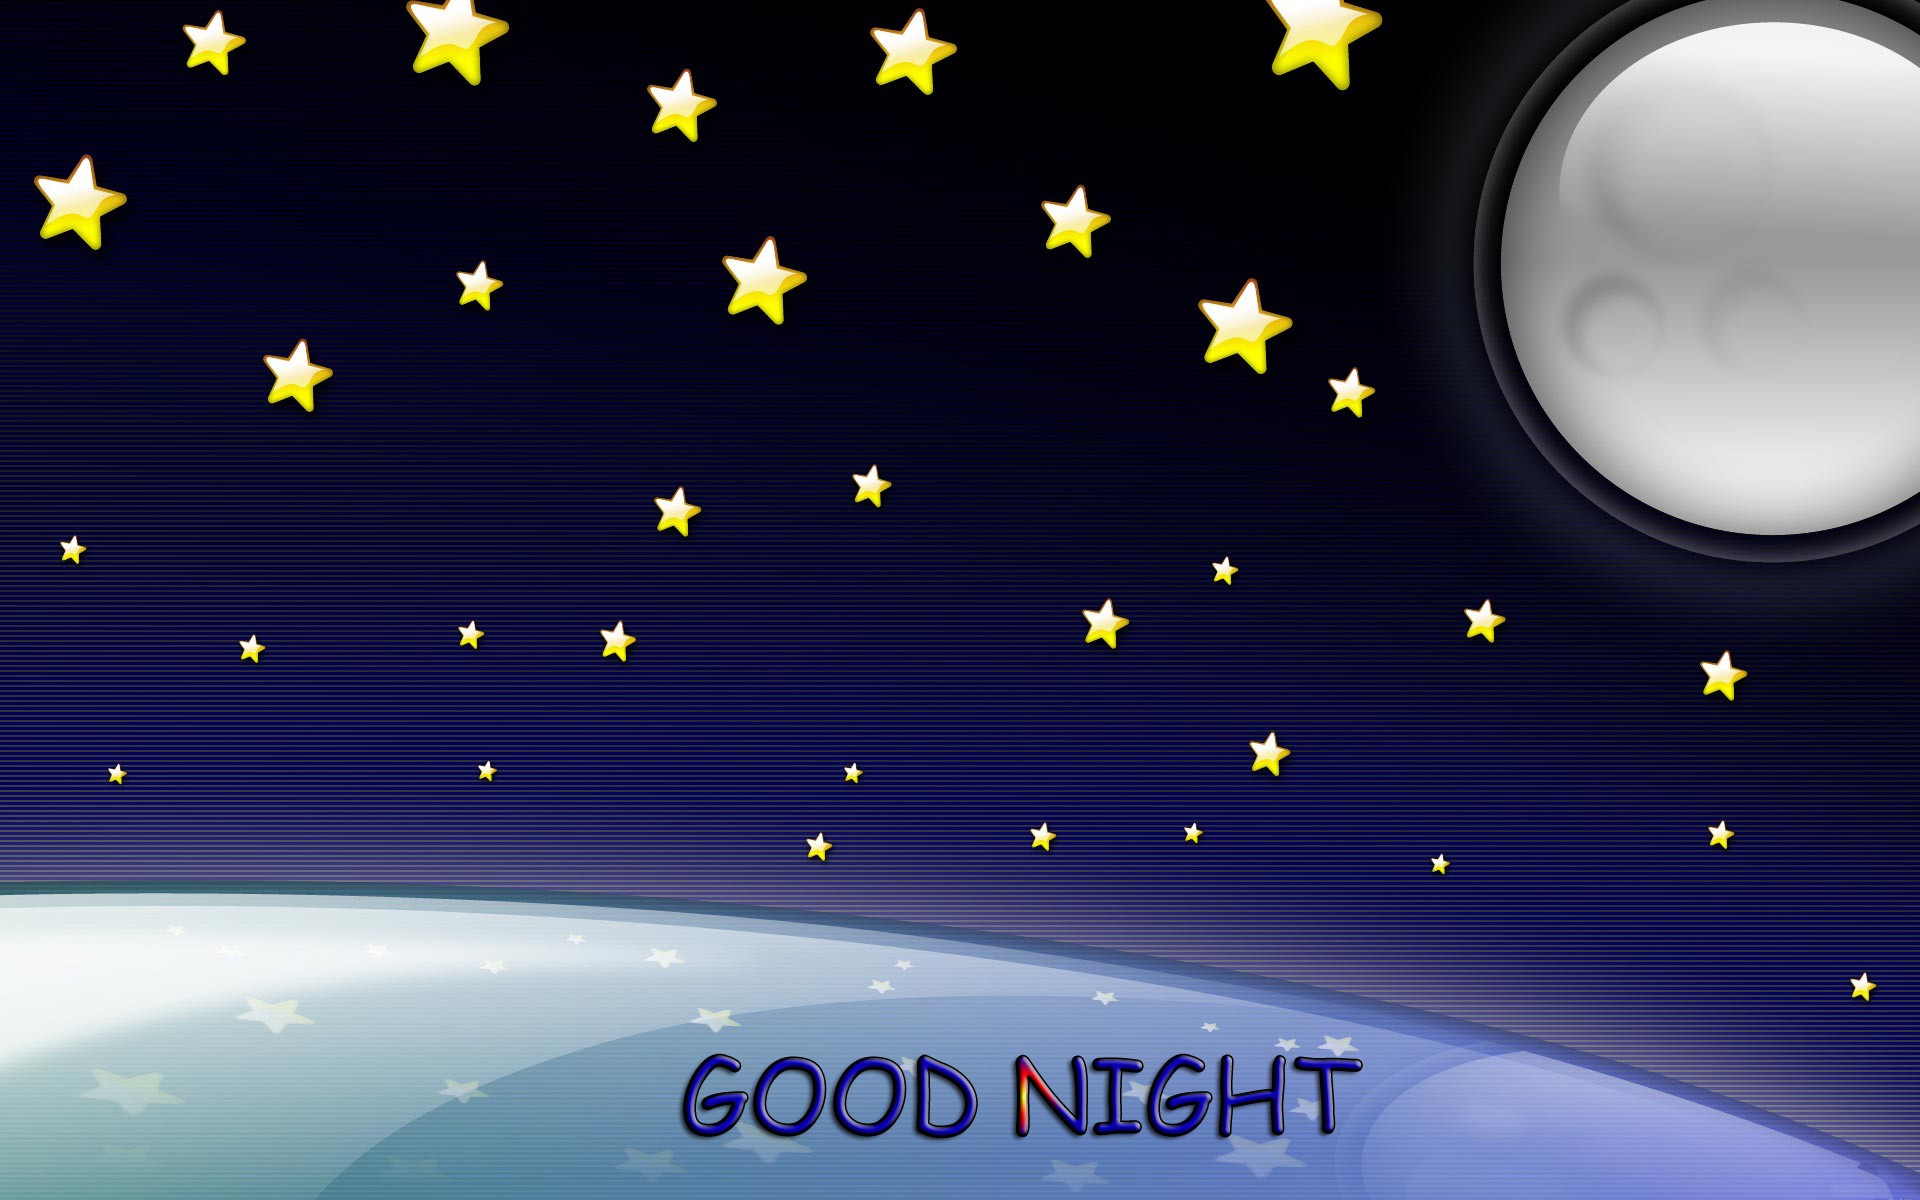 Good Morning Pictures And Good Morning Hd Wallpapers - Good Night Image With Stars - HD Wallpaper 